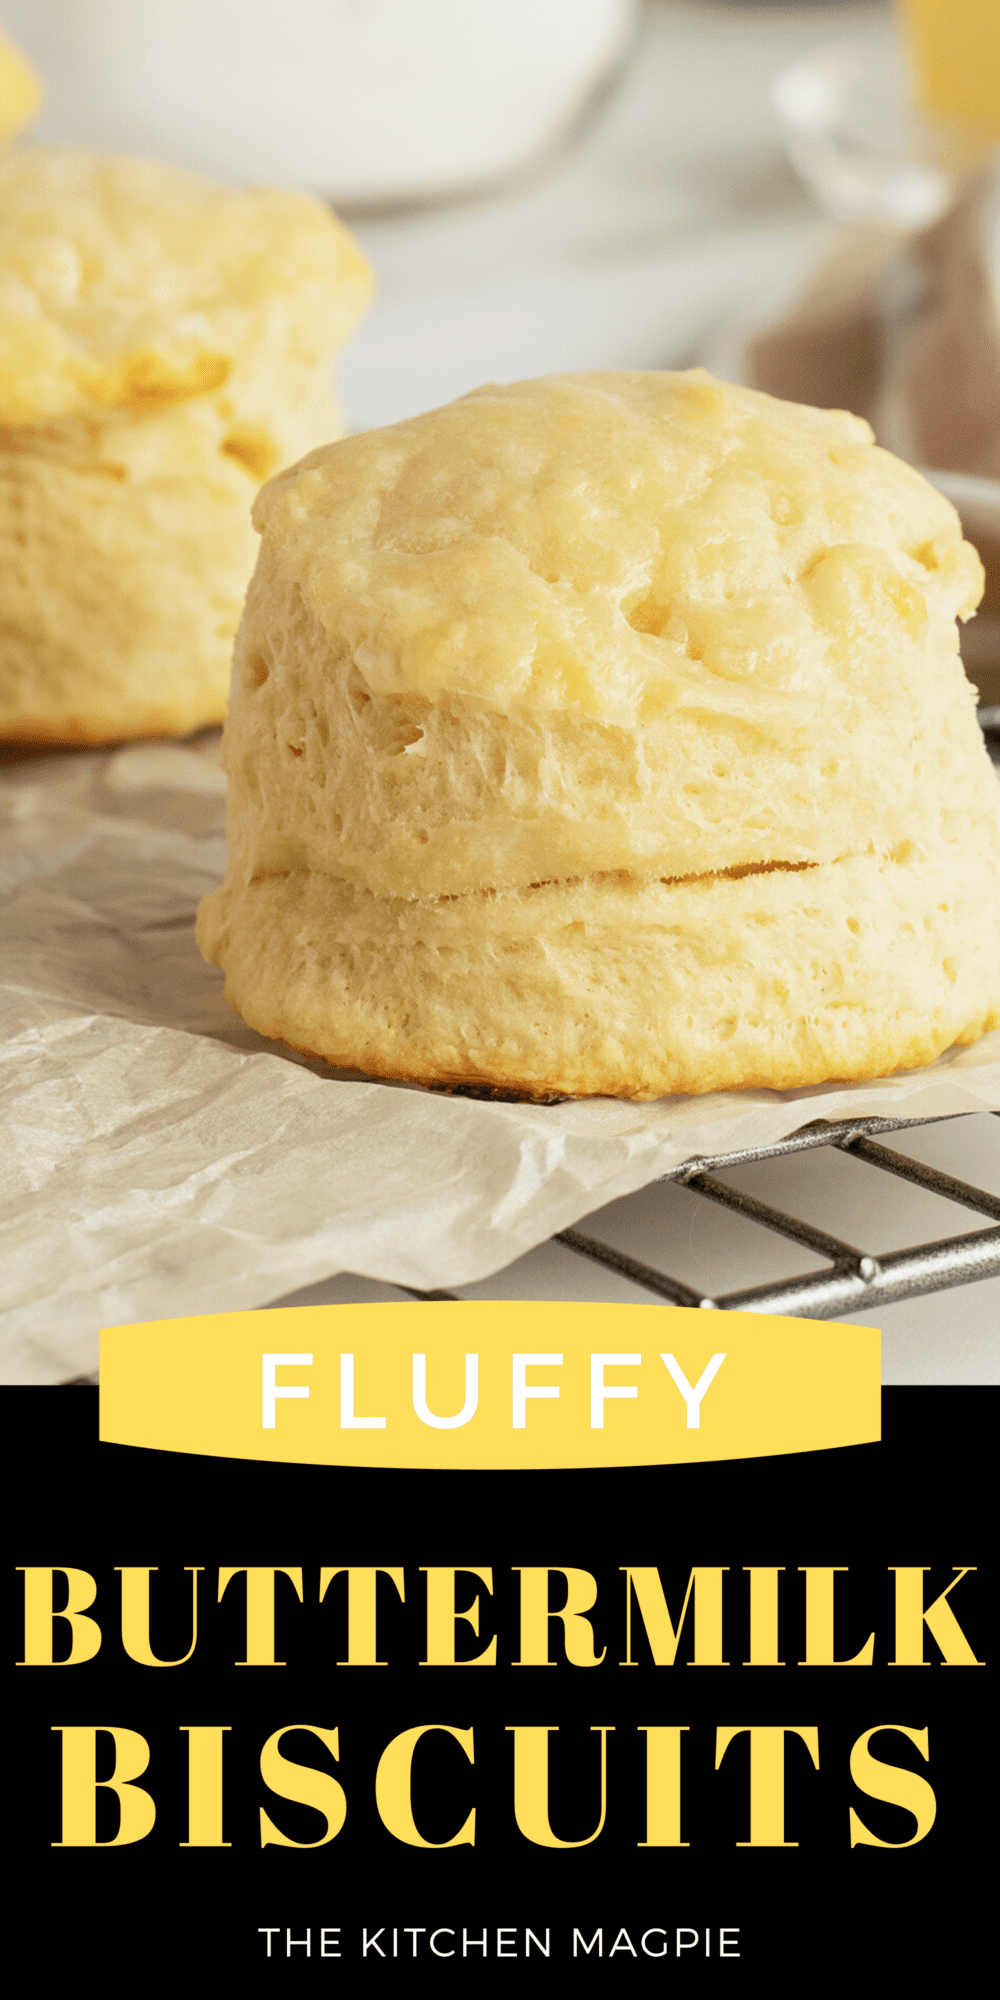 Rich and creamy, yet bready and satisfying, this recipe should make some classic biscuits perfect for any meal.